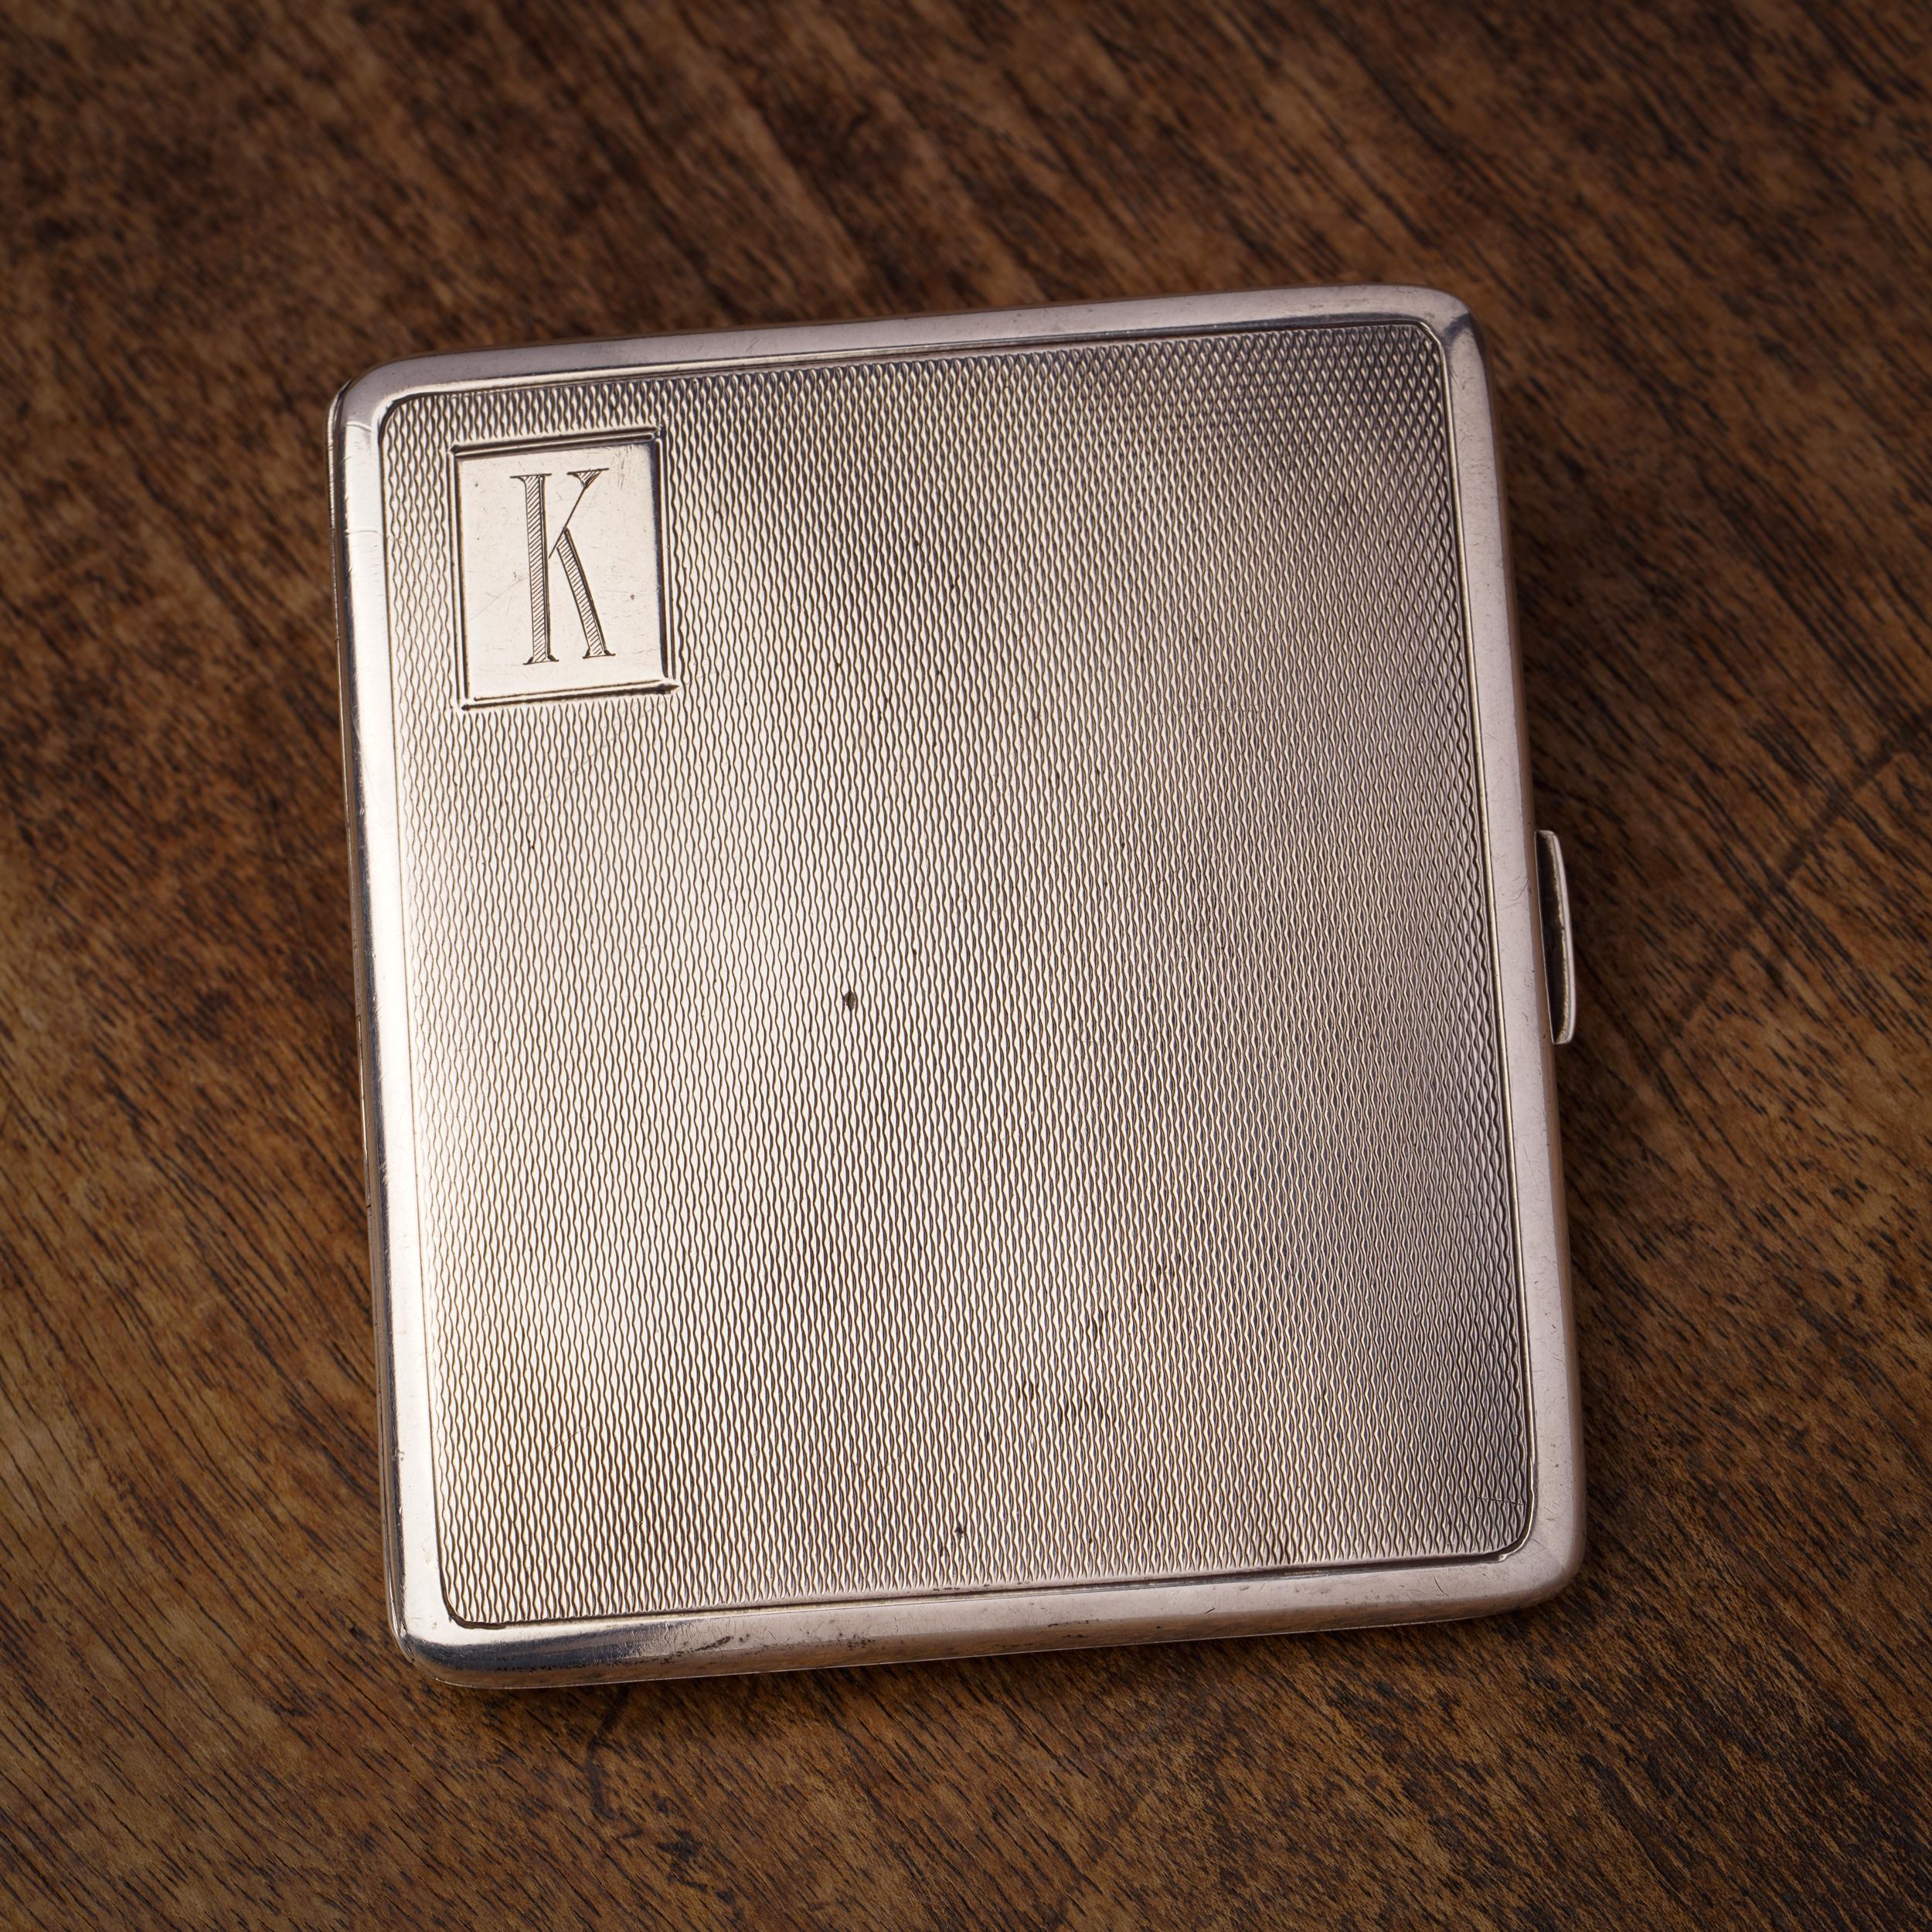 Vintage 925 Sterling Silver Engine Turned Cigarette Case with Initial 'K'

Crafted in England, specifically in Birmingham, in 1934, this vintage cigarette case is made of 925 sterling silver and features an elegant engine-turned design. The case